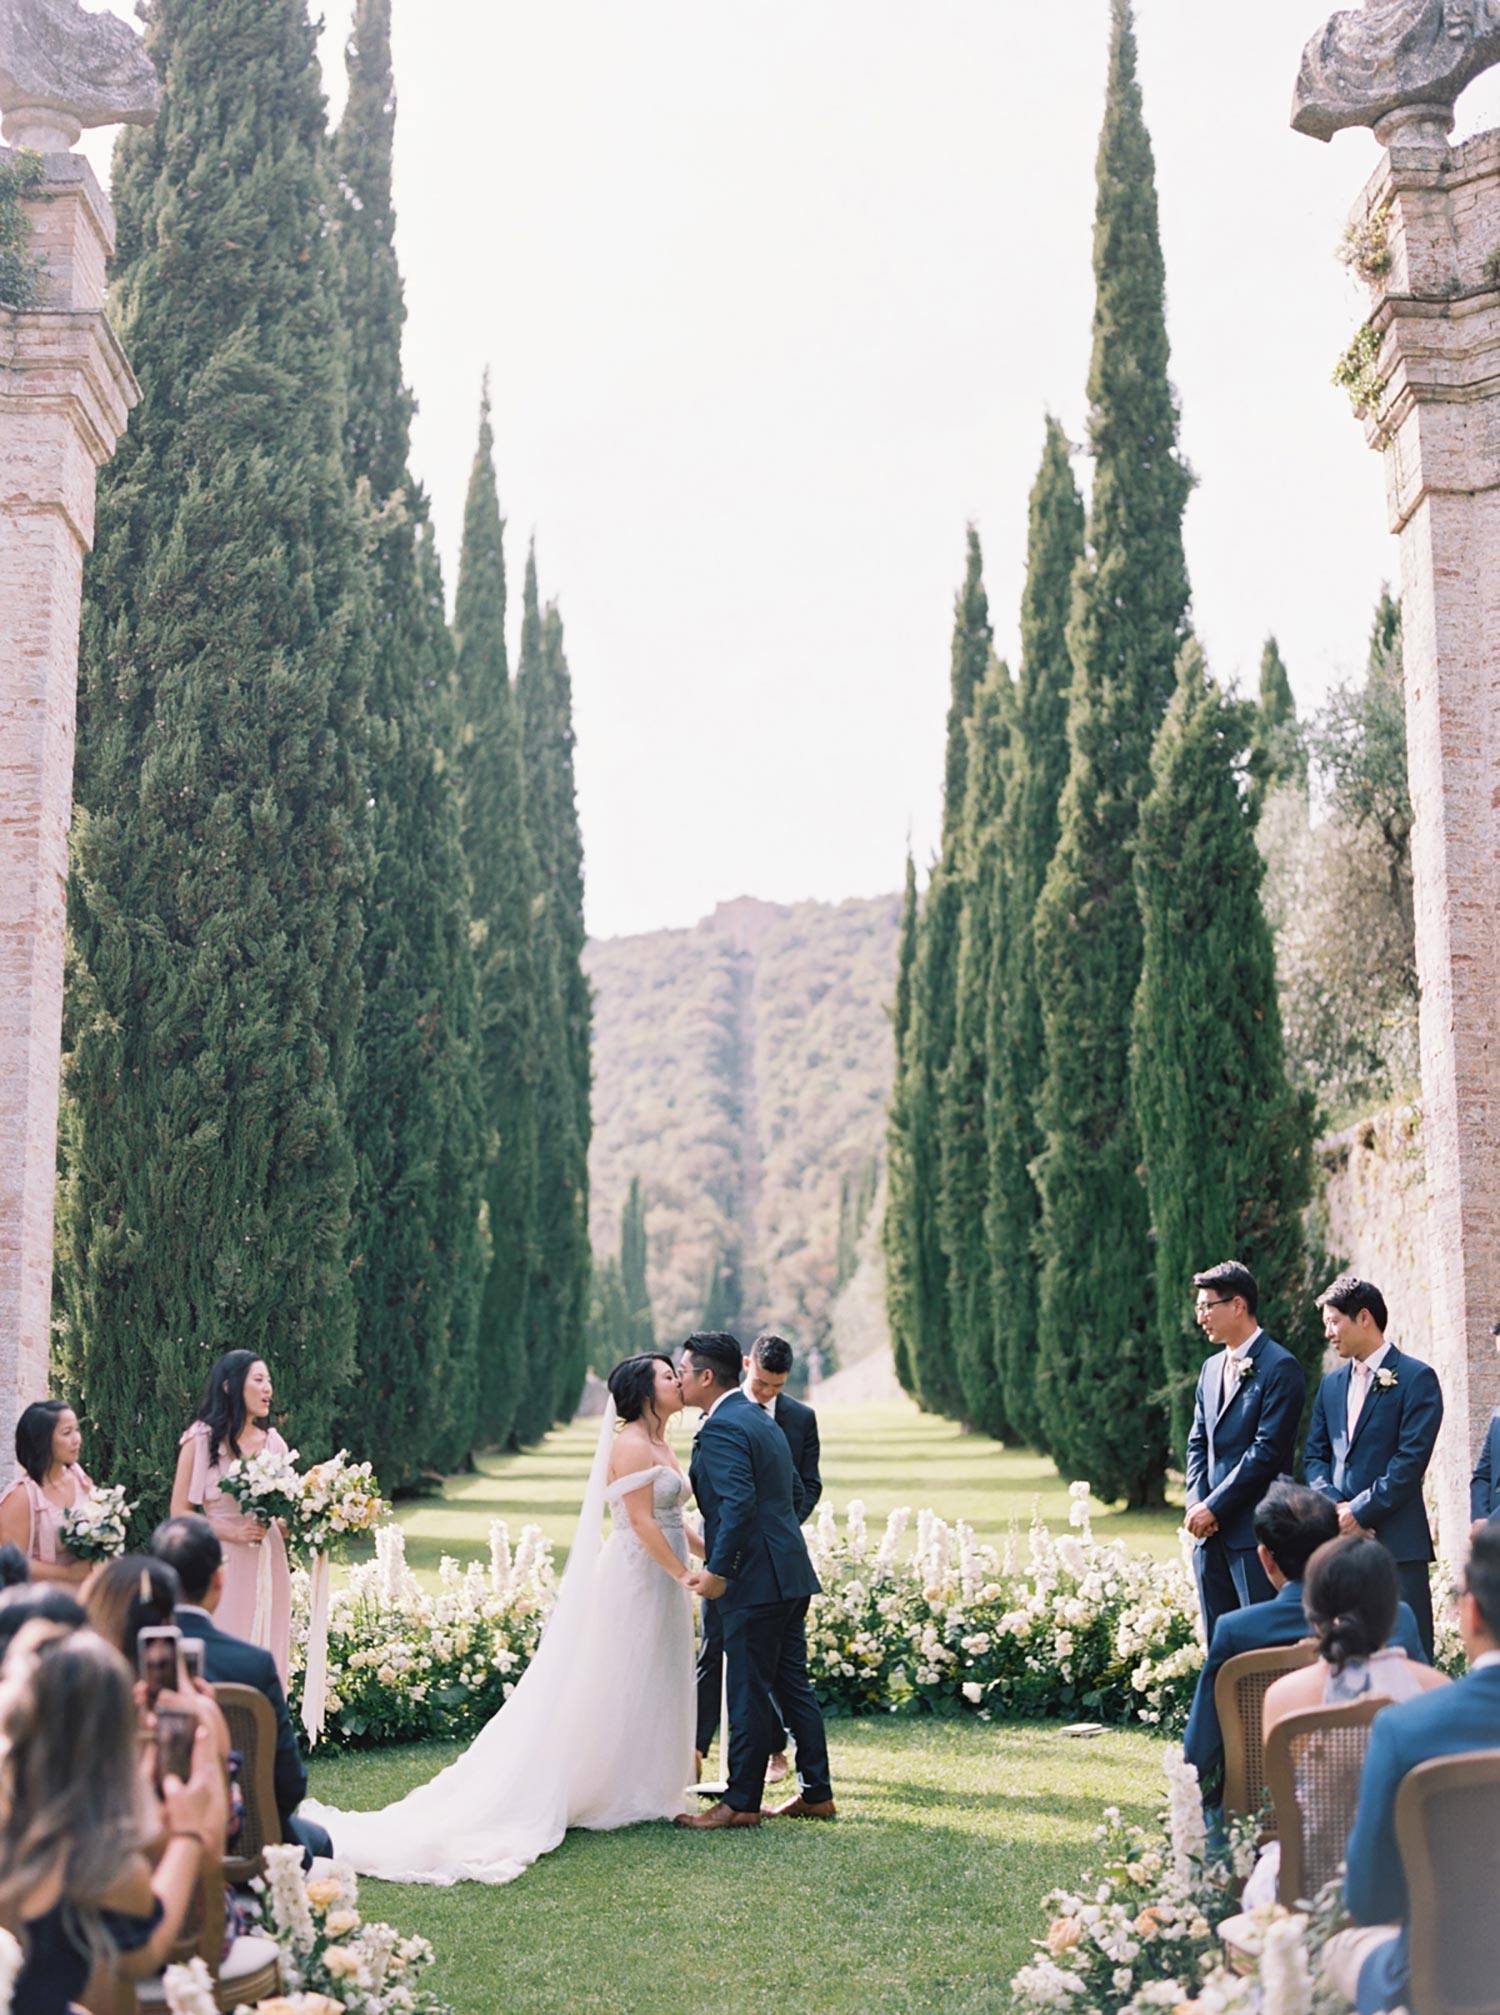 Italian villa wedding ceremony with cypress trees, cane back chairs and lush green and white flower aisle